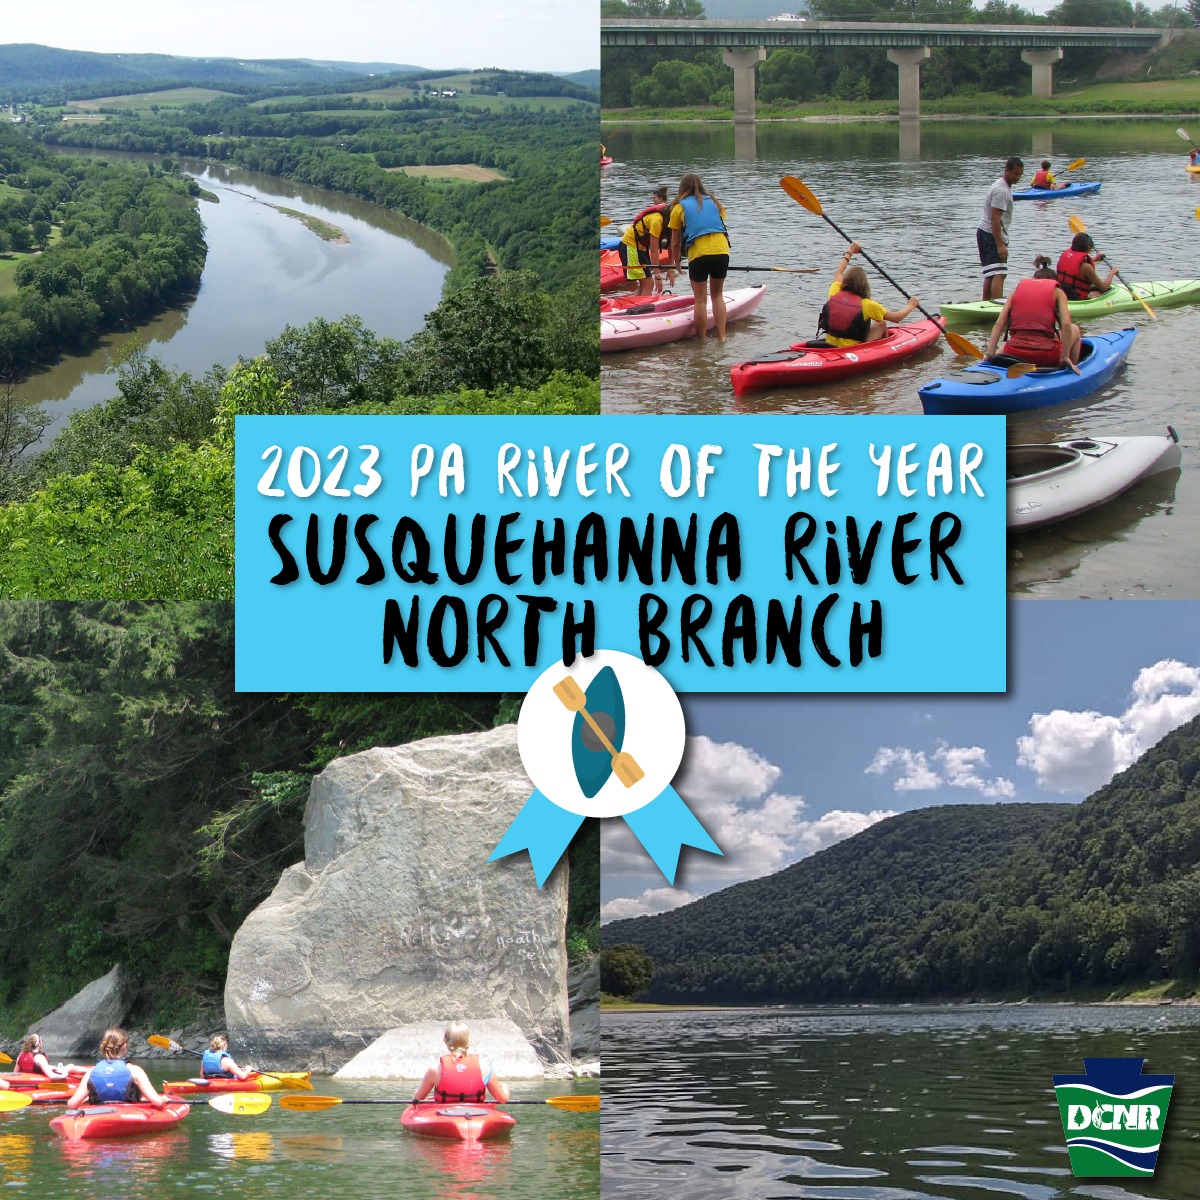 Susquehanna's North Branch Named 2023 River of the Year